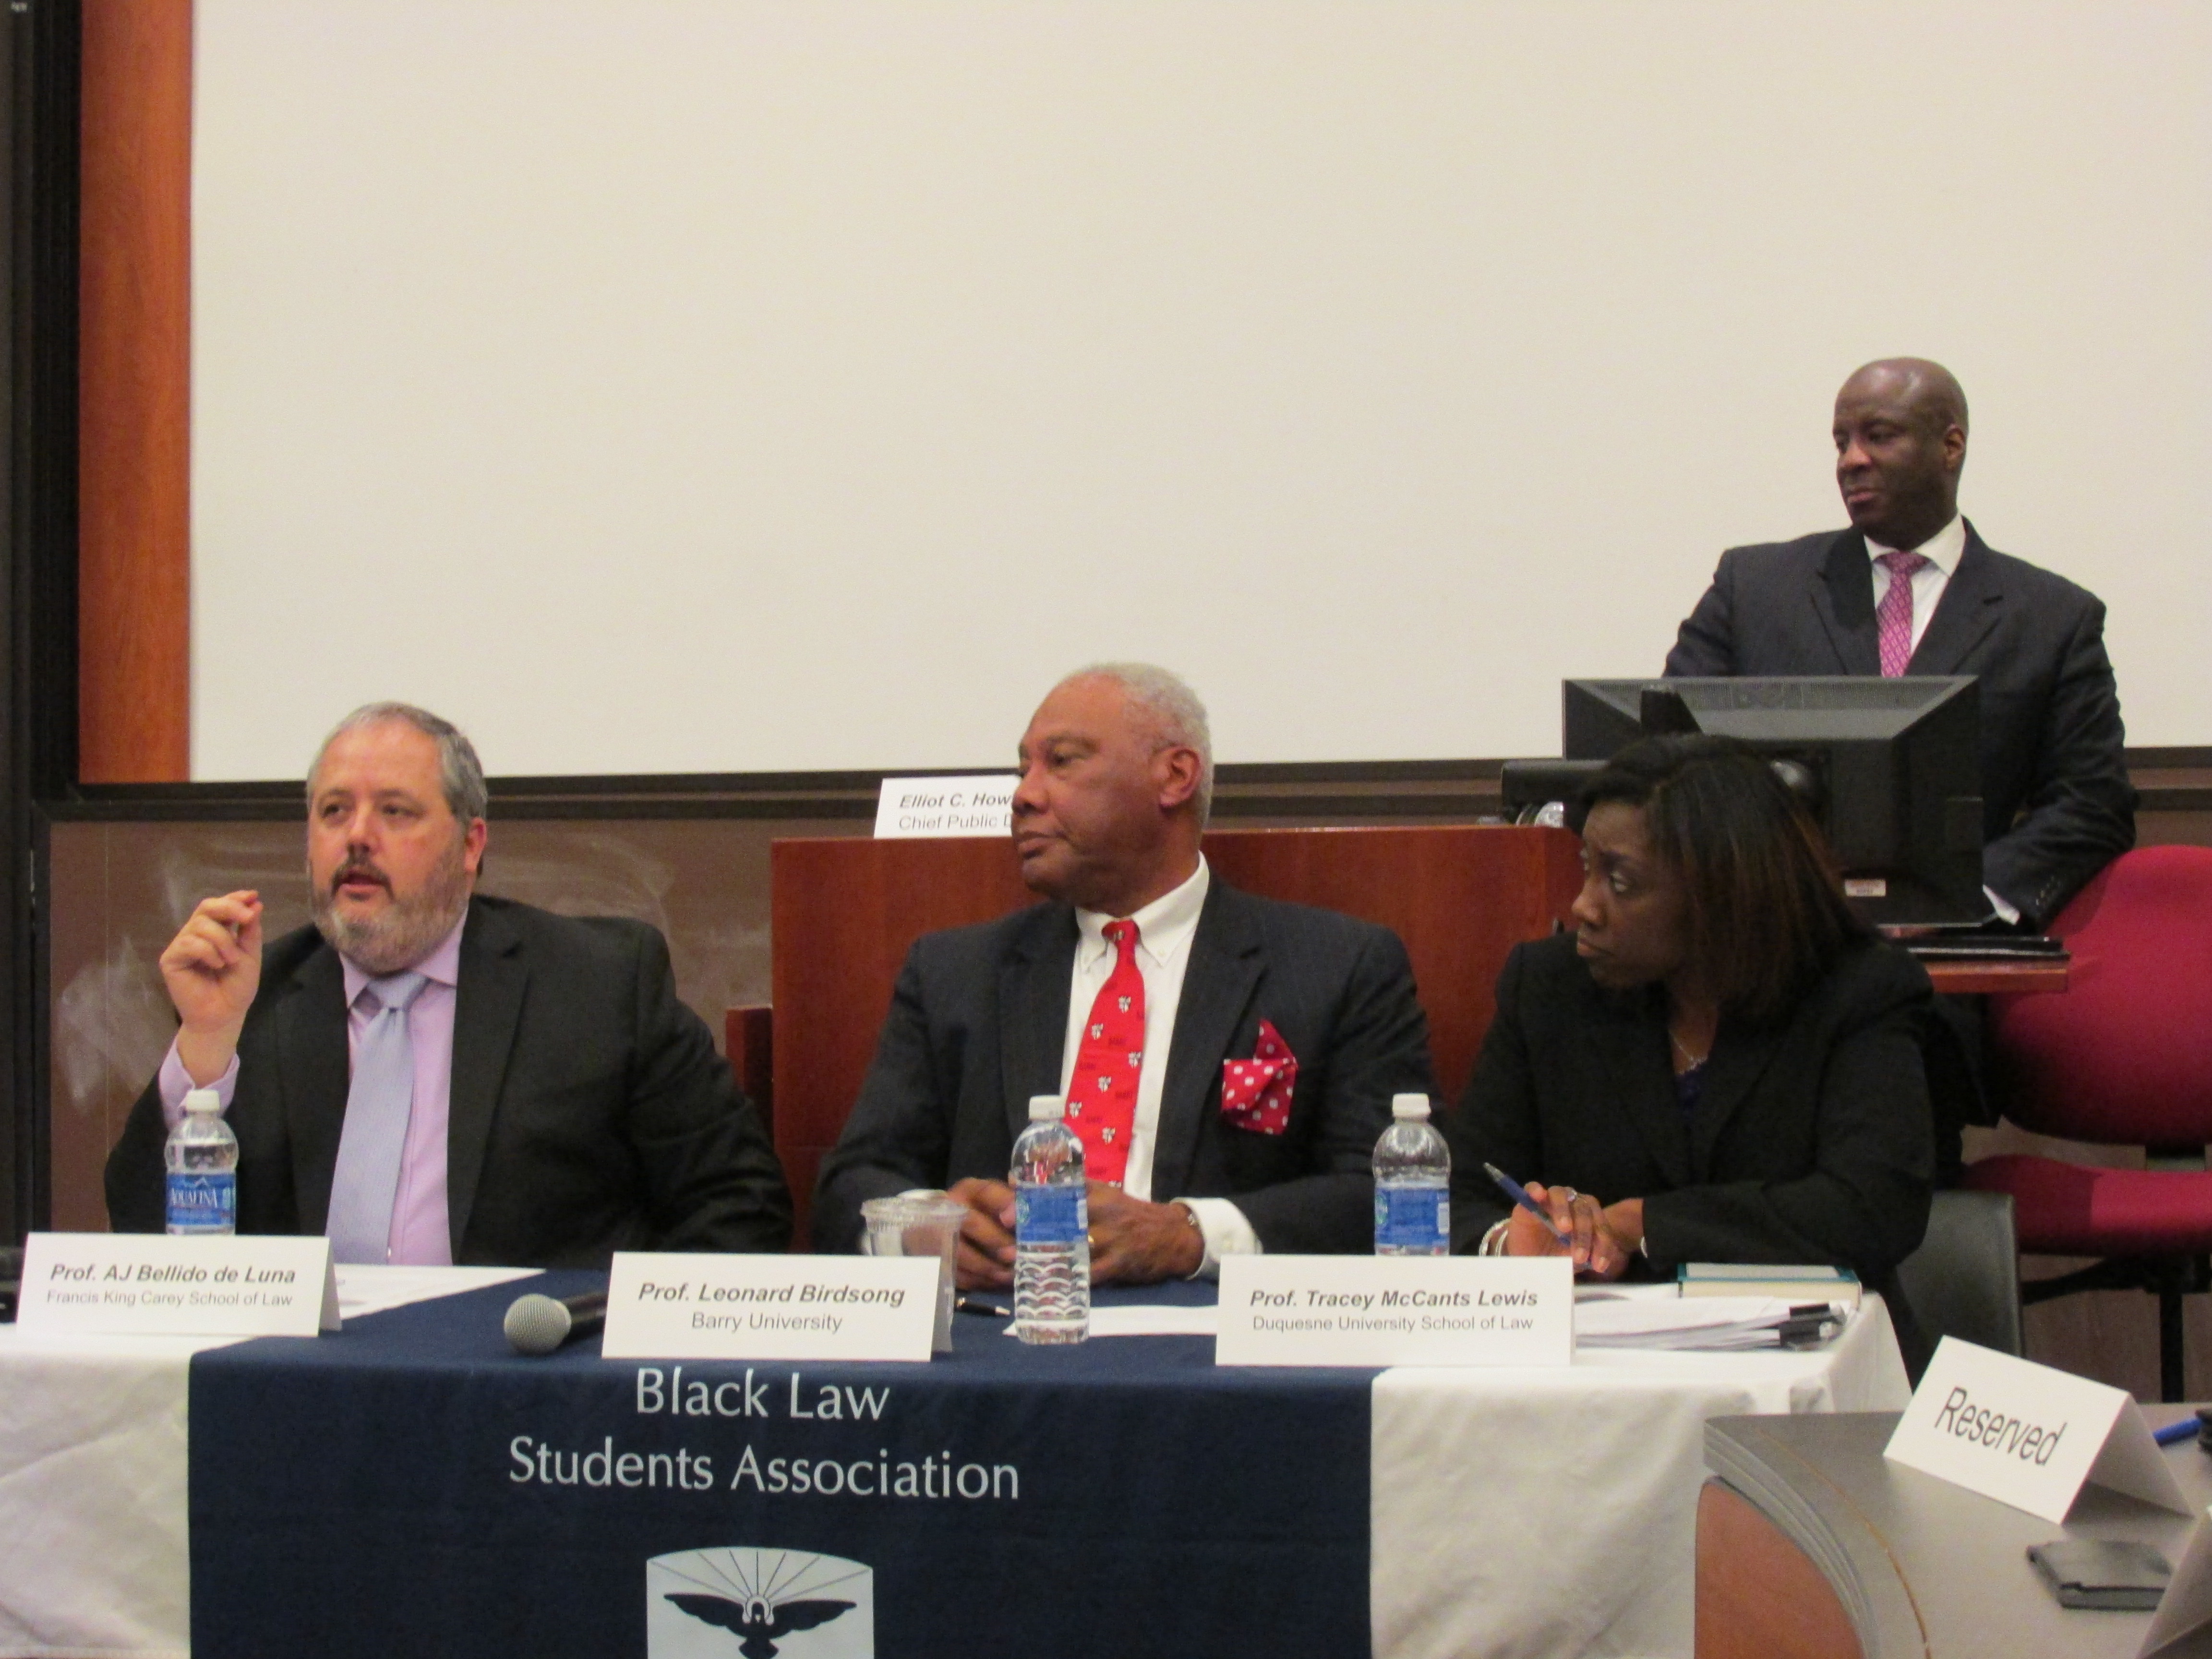 Panel at Duquesne Law School Discusses the Trayvon Martin Case